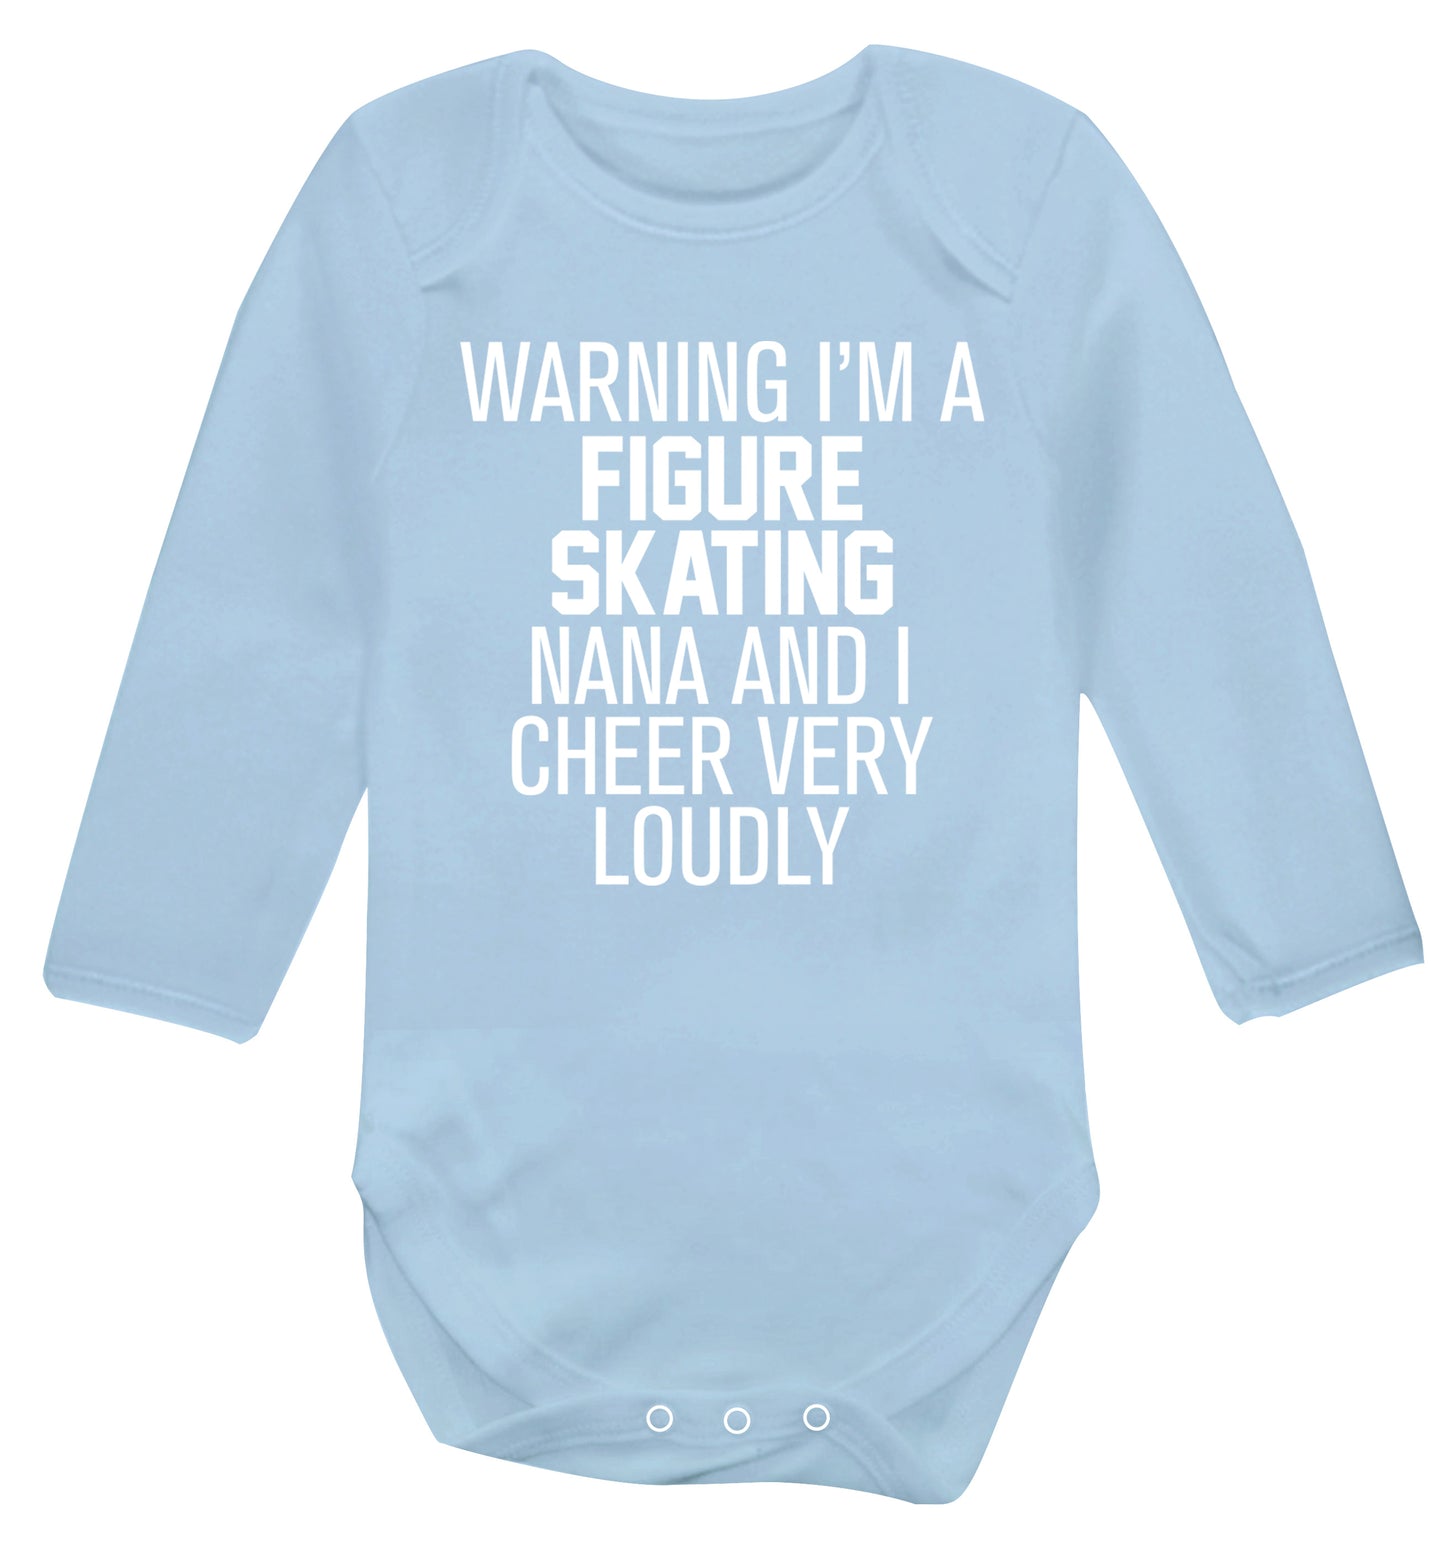 Warning I'm a figure skating nana and I cheer very loudly Baby Vest long sleeved pale blue 6-12 months